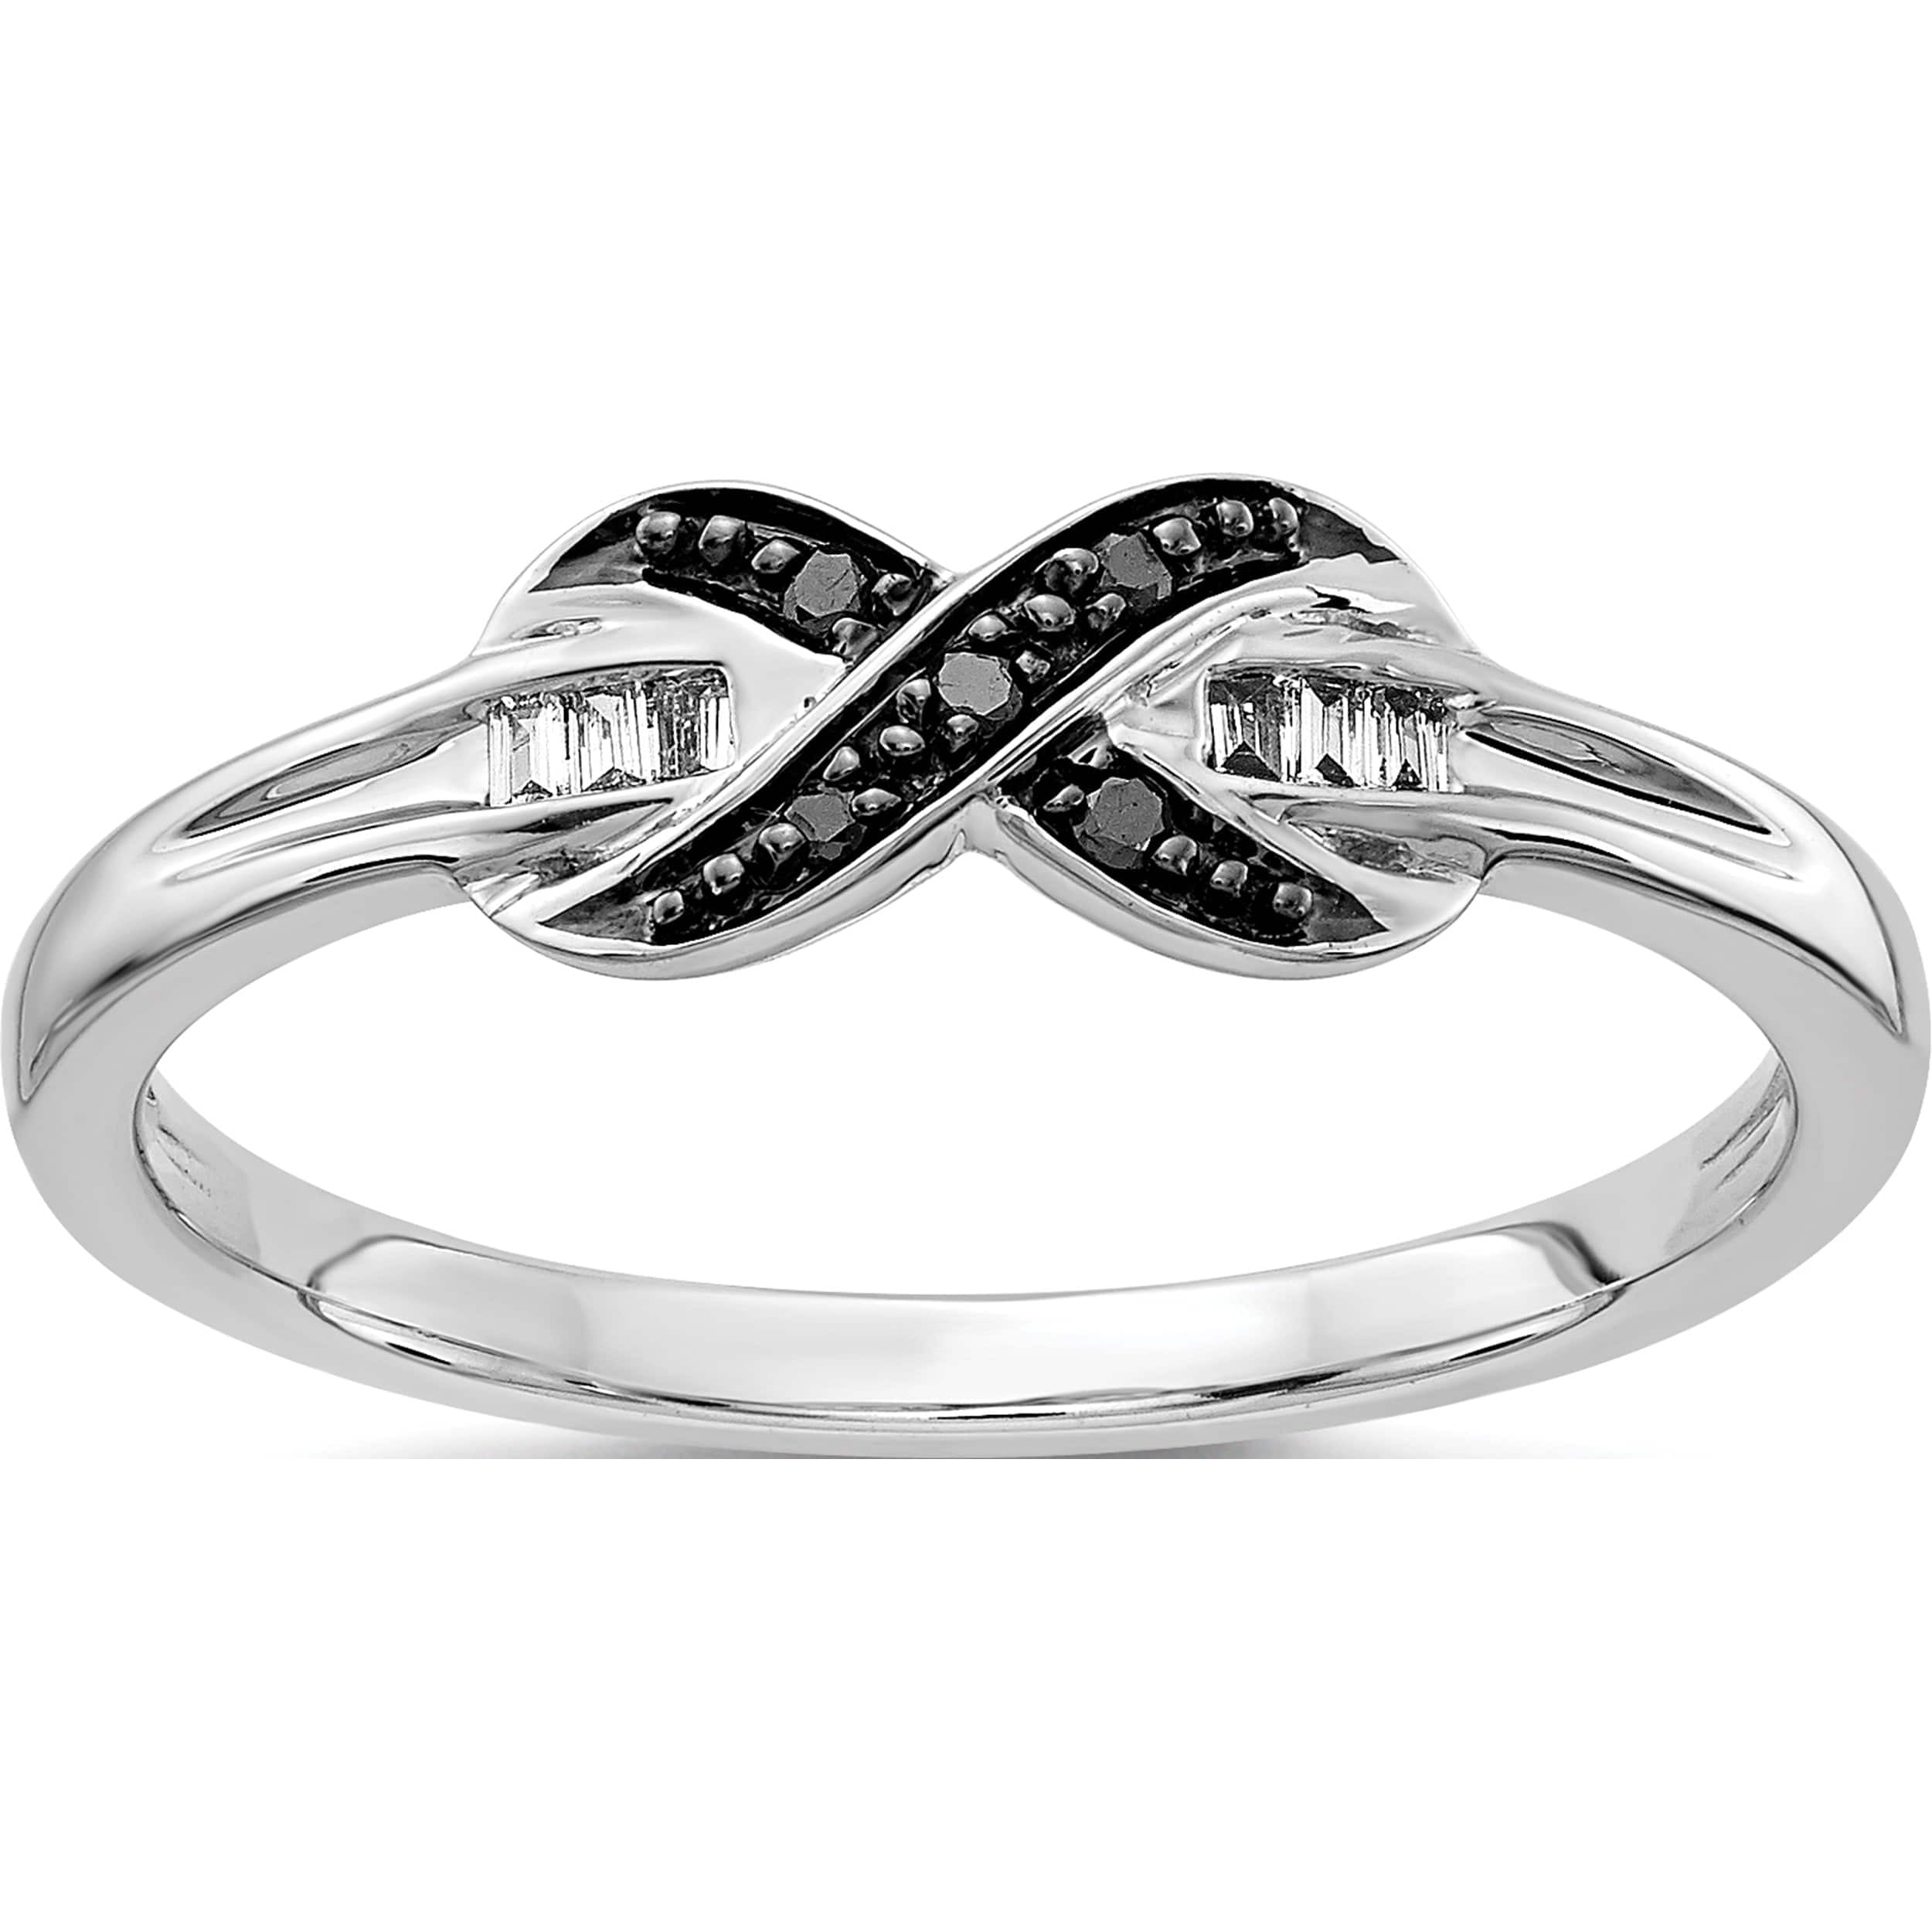 Jagsun Rings For Men Golden Colour Double Black Stripes Ring Crystal,  Stainless Steel, Sterling Silver, Zinc Silver, Titanium Plated Ring Price  in India - Buy Jagsun Rings For Men Golden Colour Double